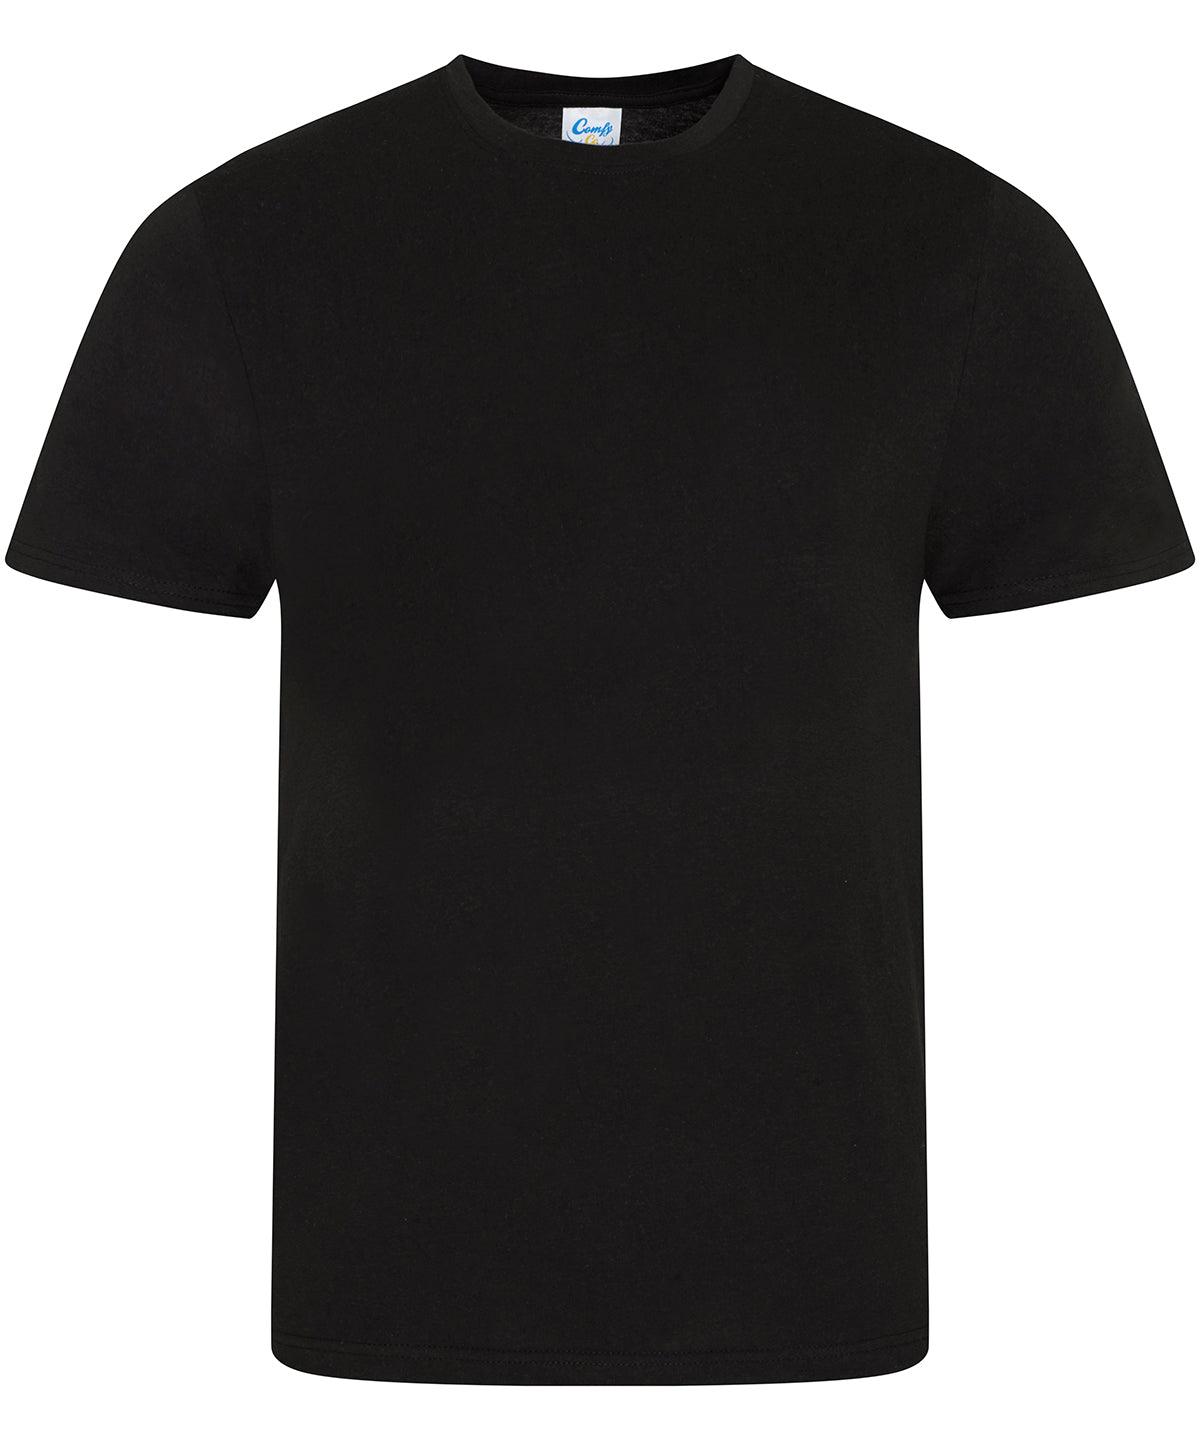 Black - Guys lounge T T-Shirts Comfy Co Lounge & Underwear, Lounge Sets, Must Haves, New Colours for 2021, Rebrandable, T-Shirts & Vests Schoolwear Centres